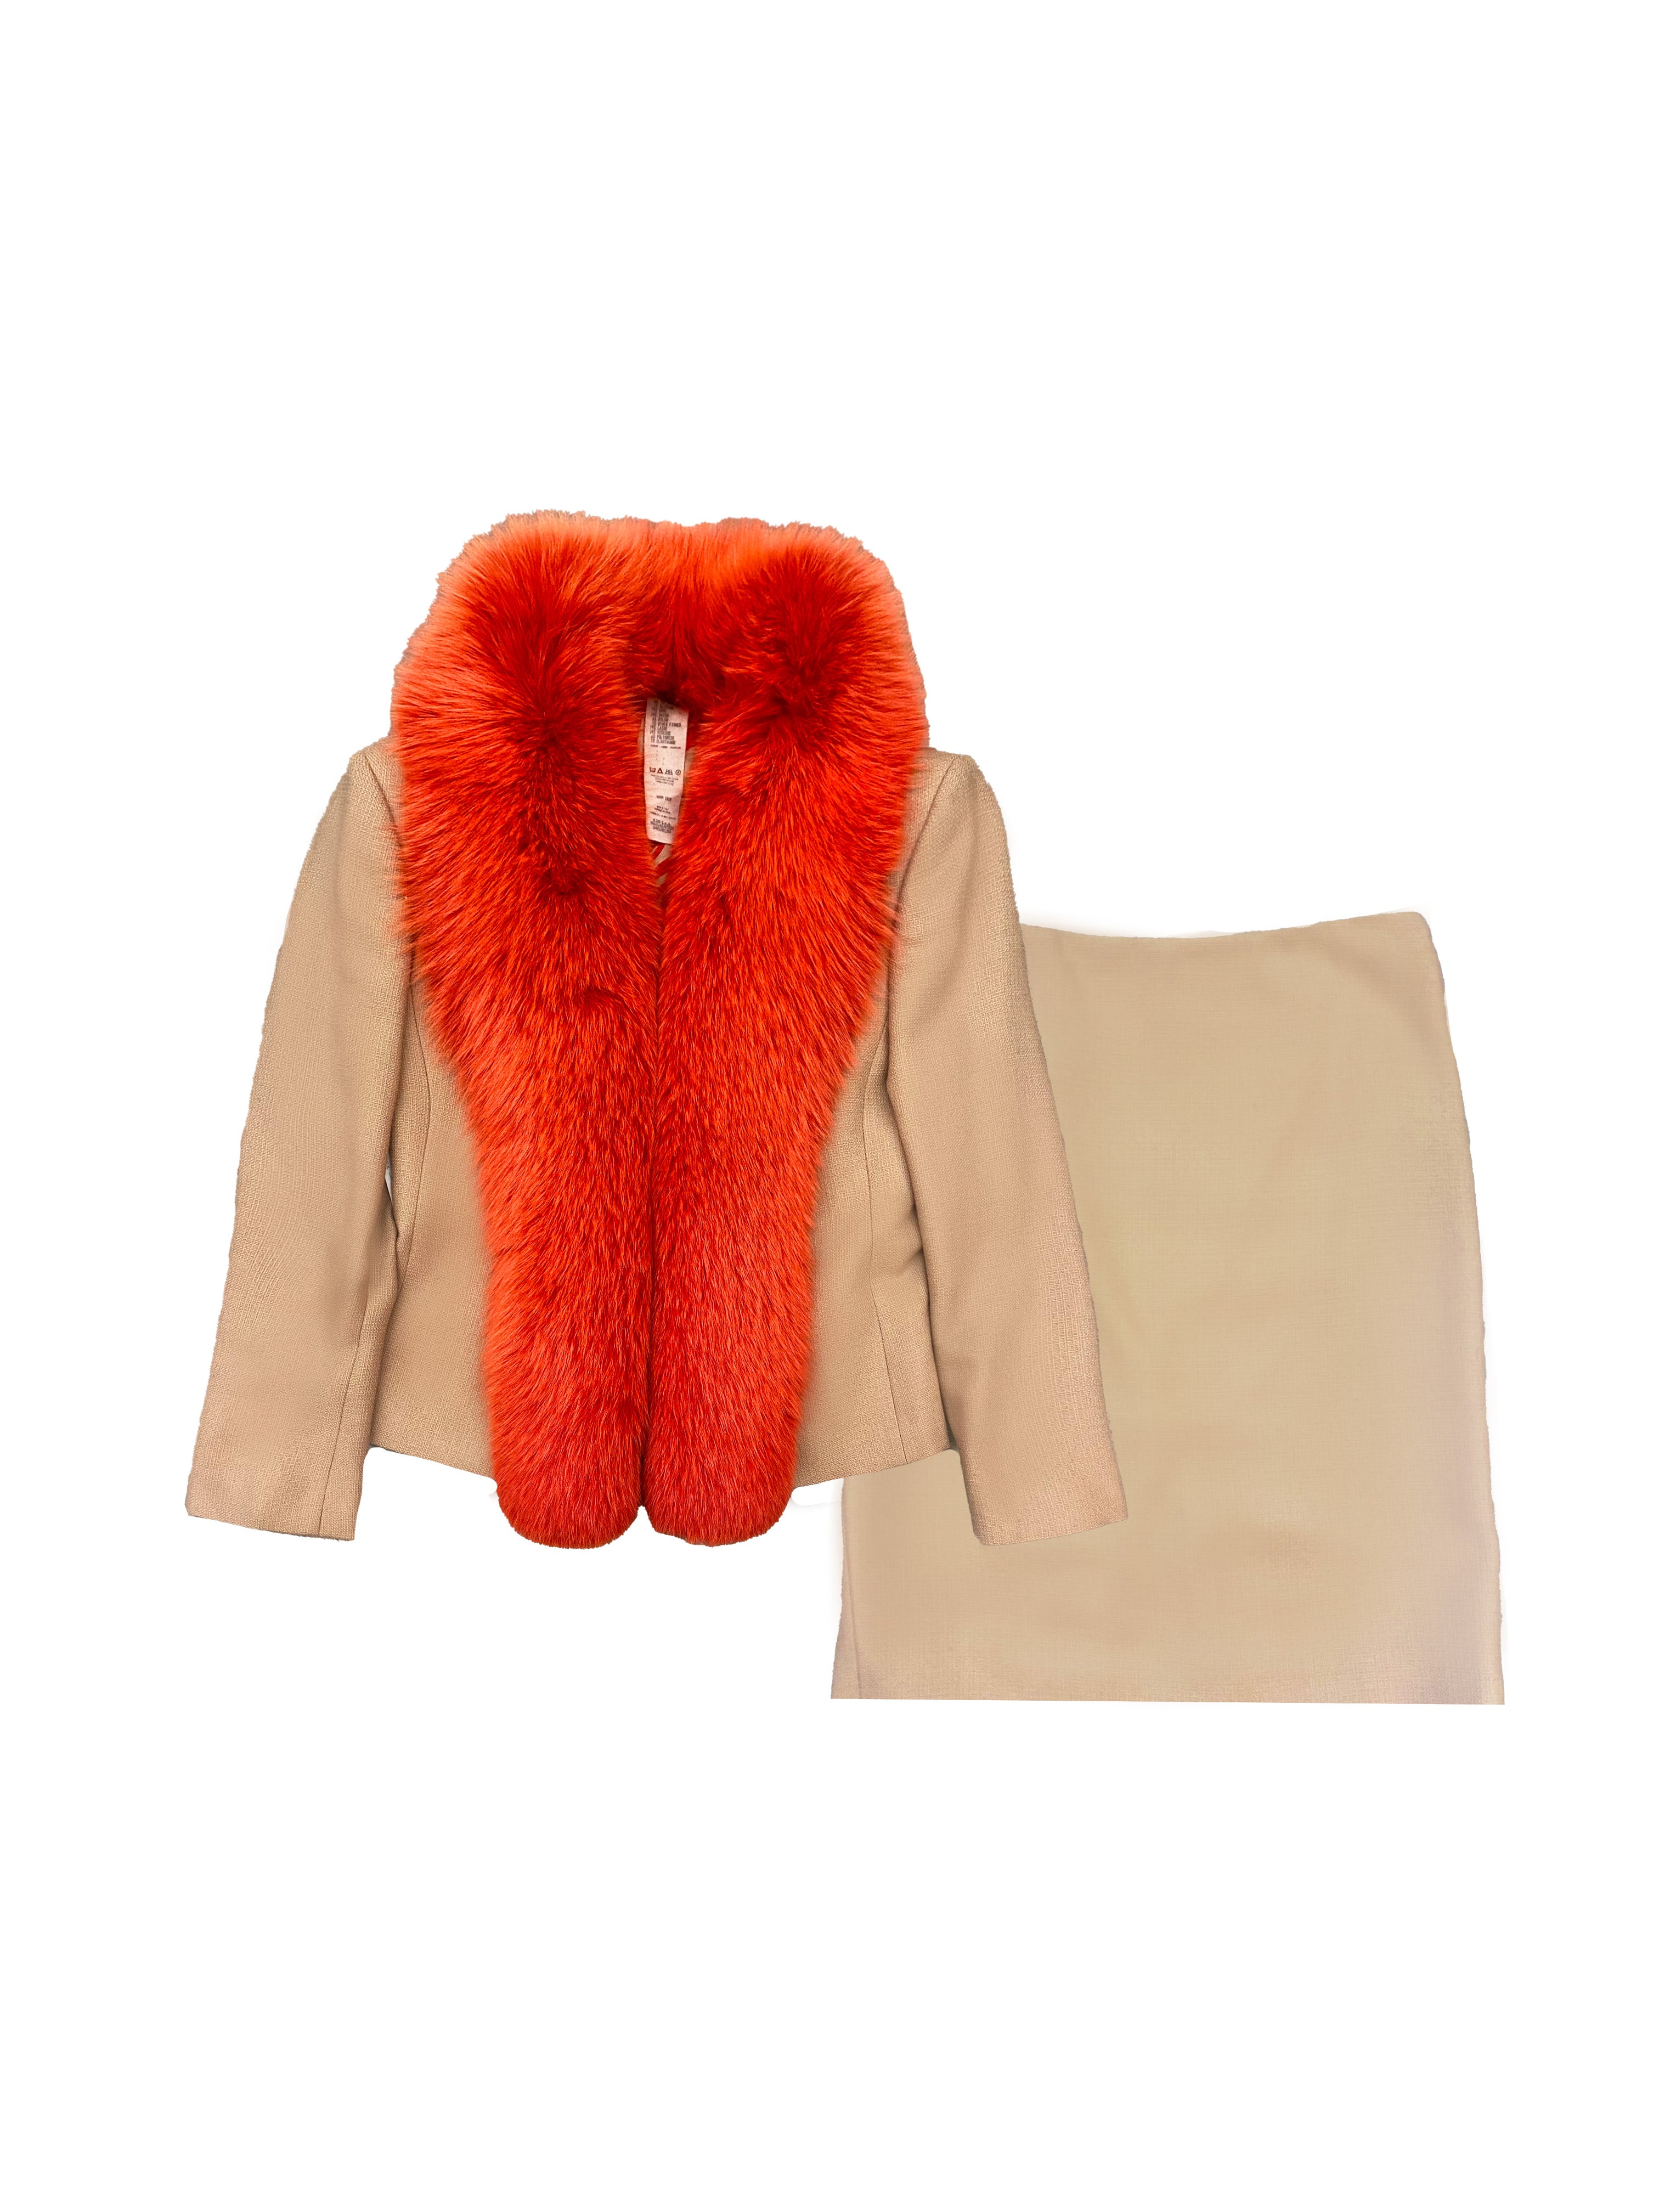 Gianni Versace 1990s Couture Coral Fox Fur Set